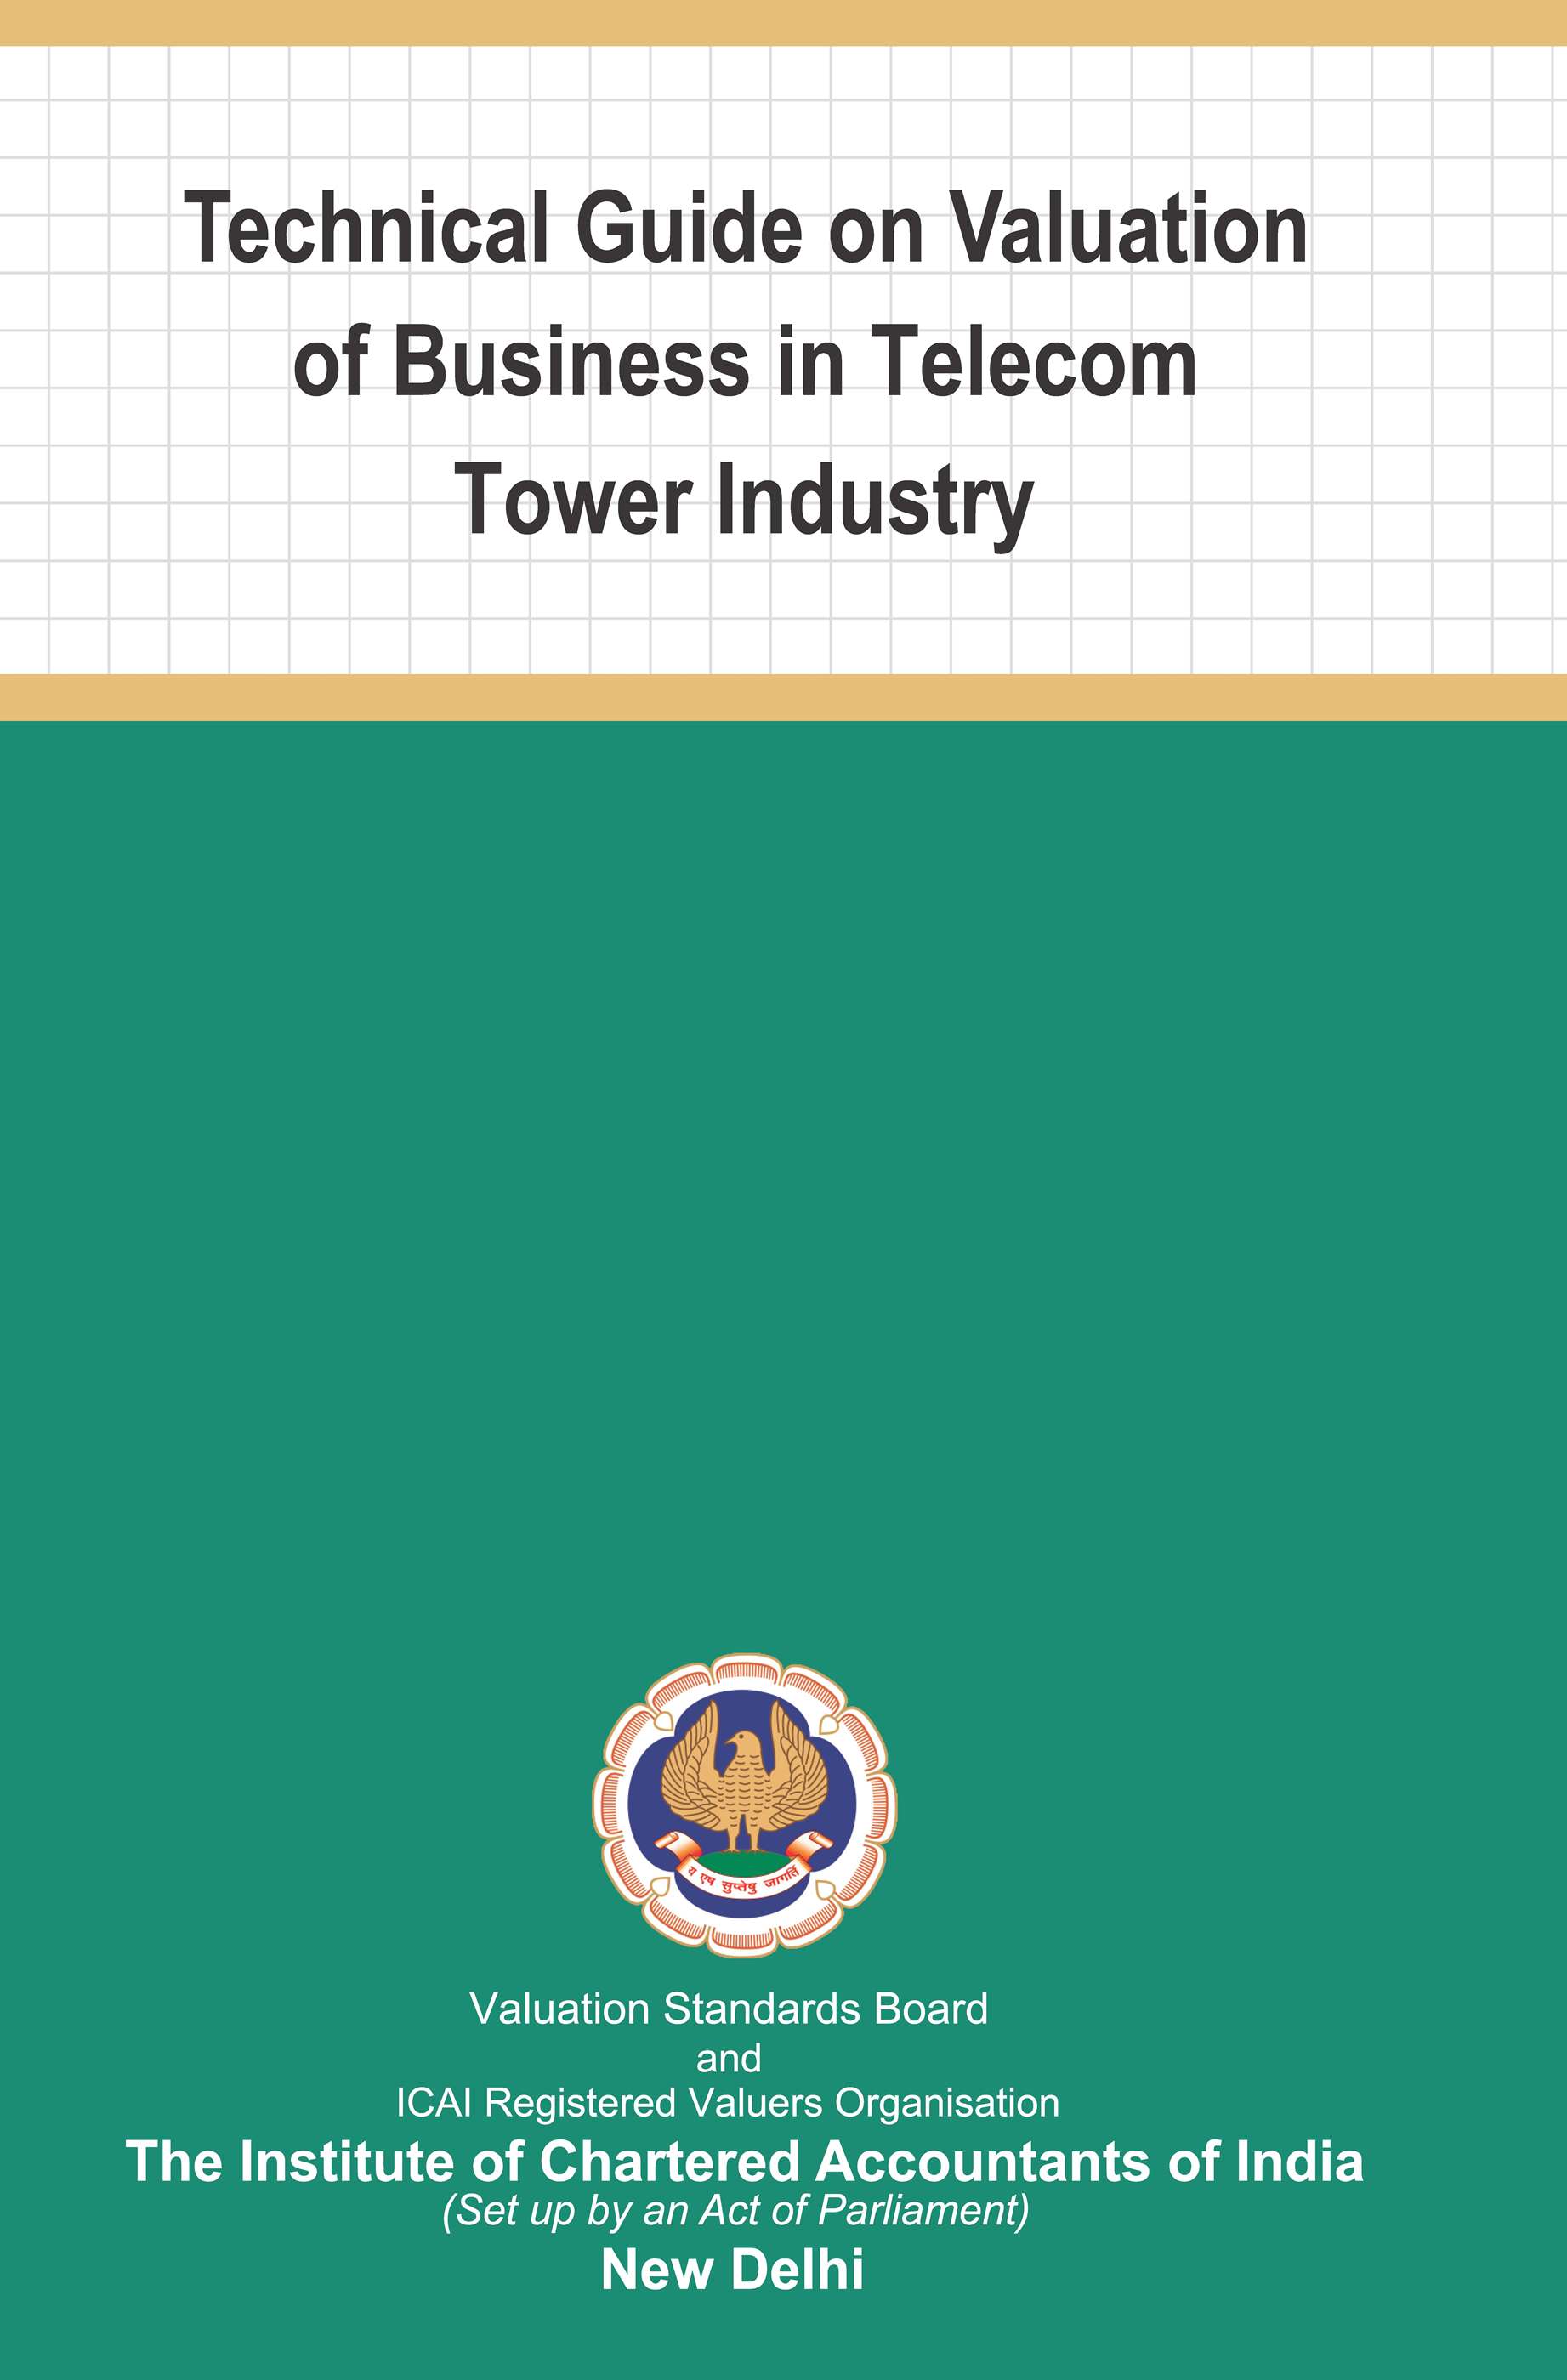 Technical Guide on Valuation of Business in Telecom Tower Industry (July, 2022)